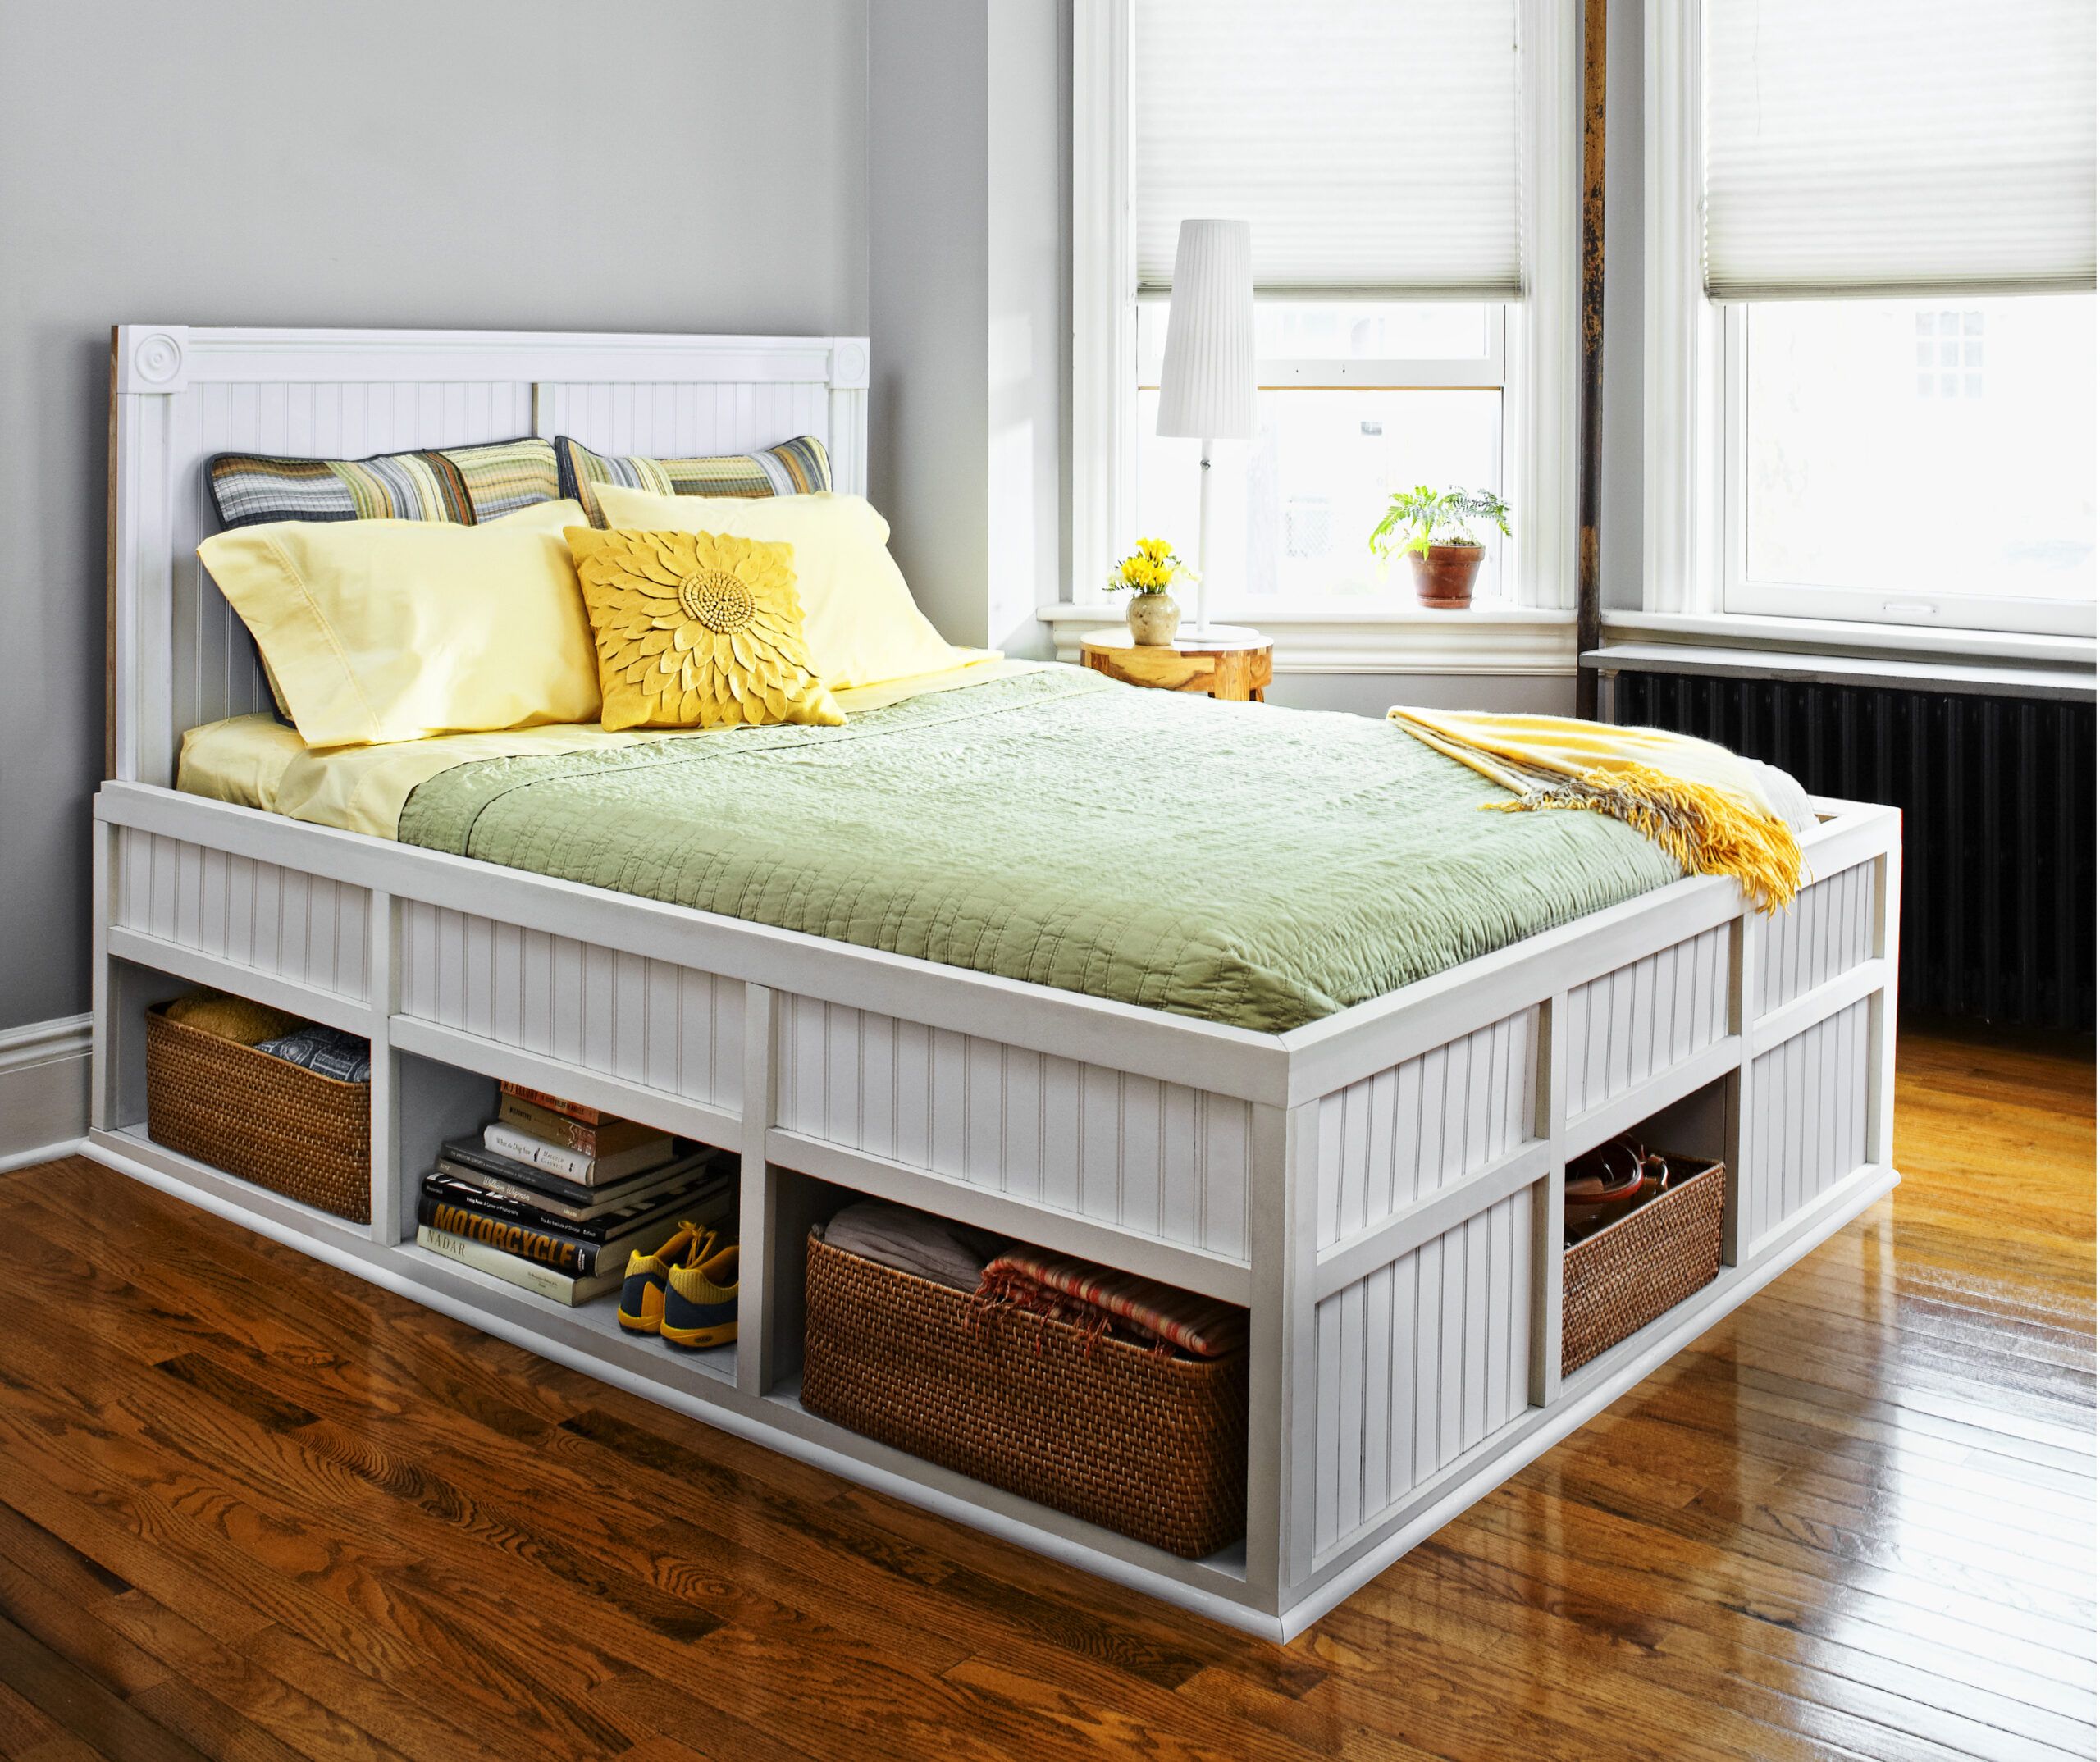 27 Ways to Build Your Own Bedroom Furniture - This Old House